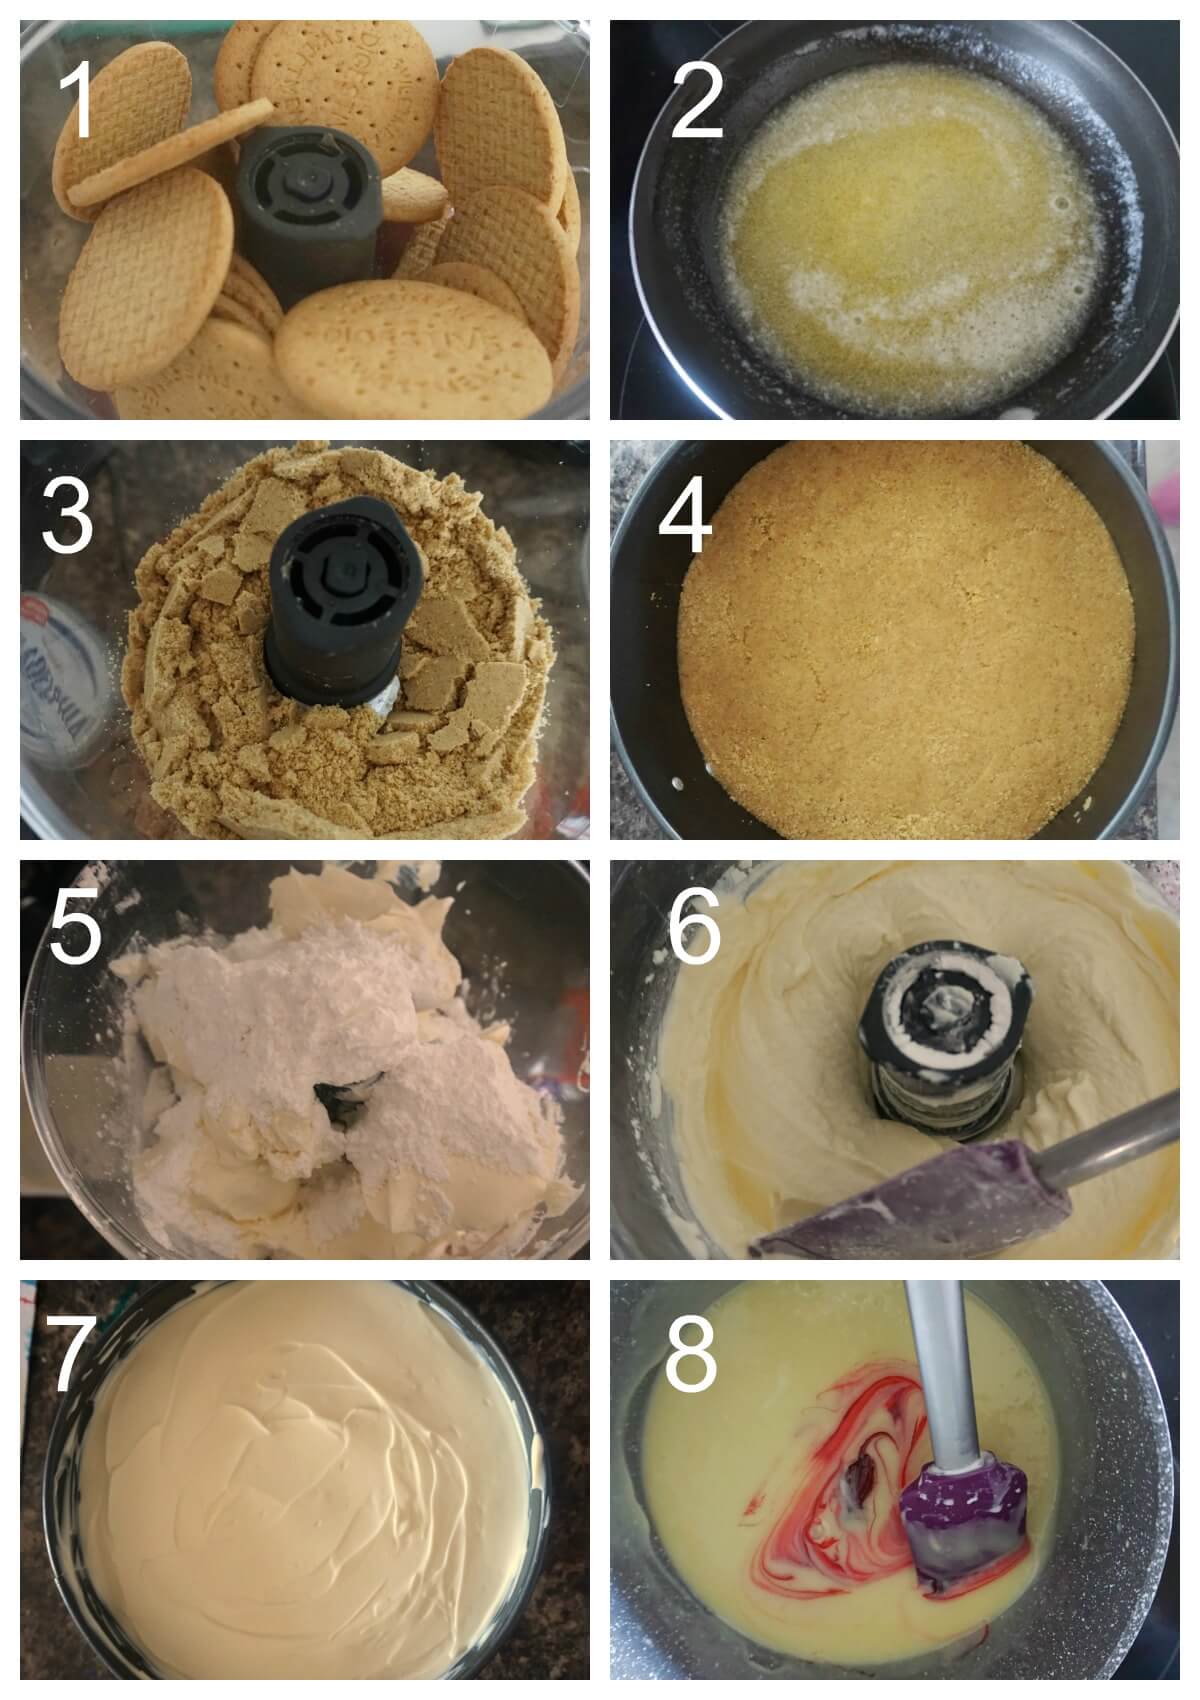 Collage of 8 photos to show how to make a bleeding cheesecake for Halloween.